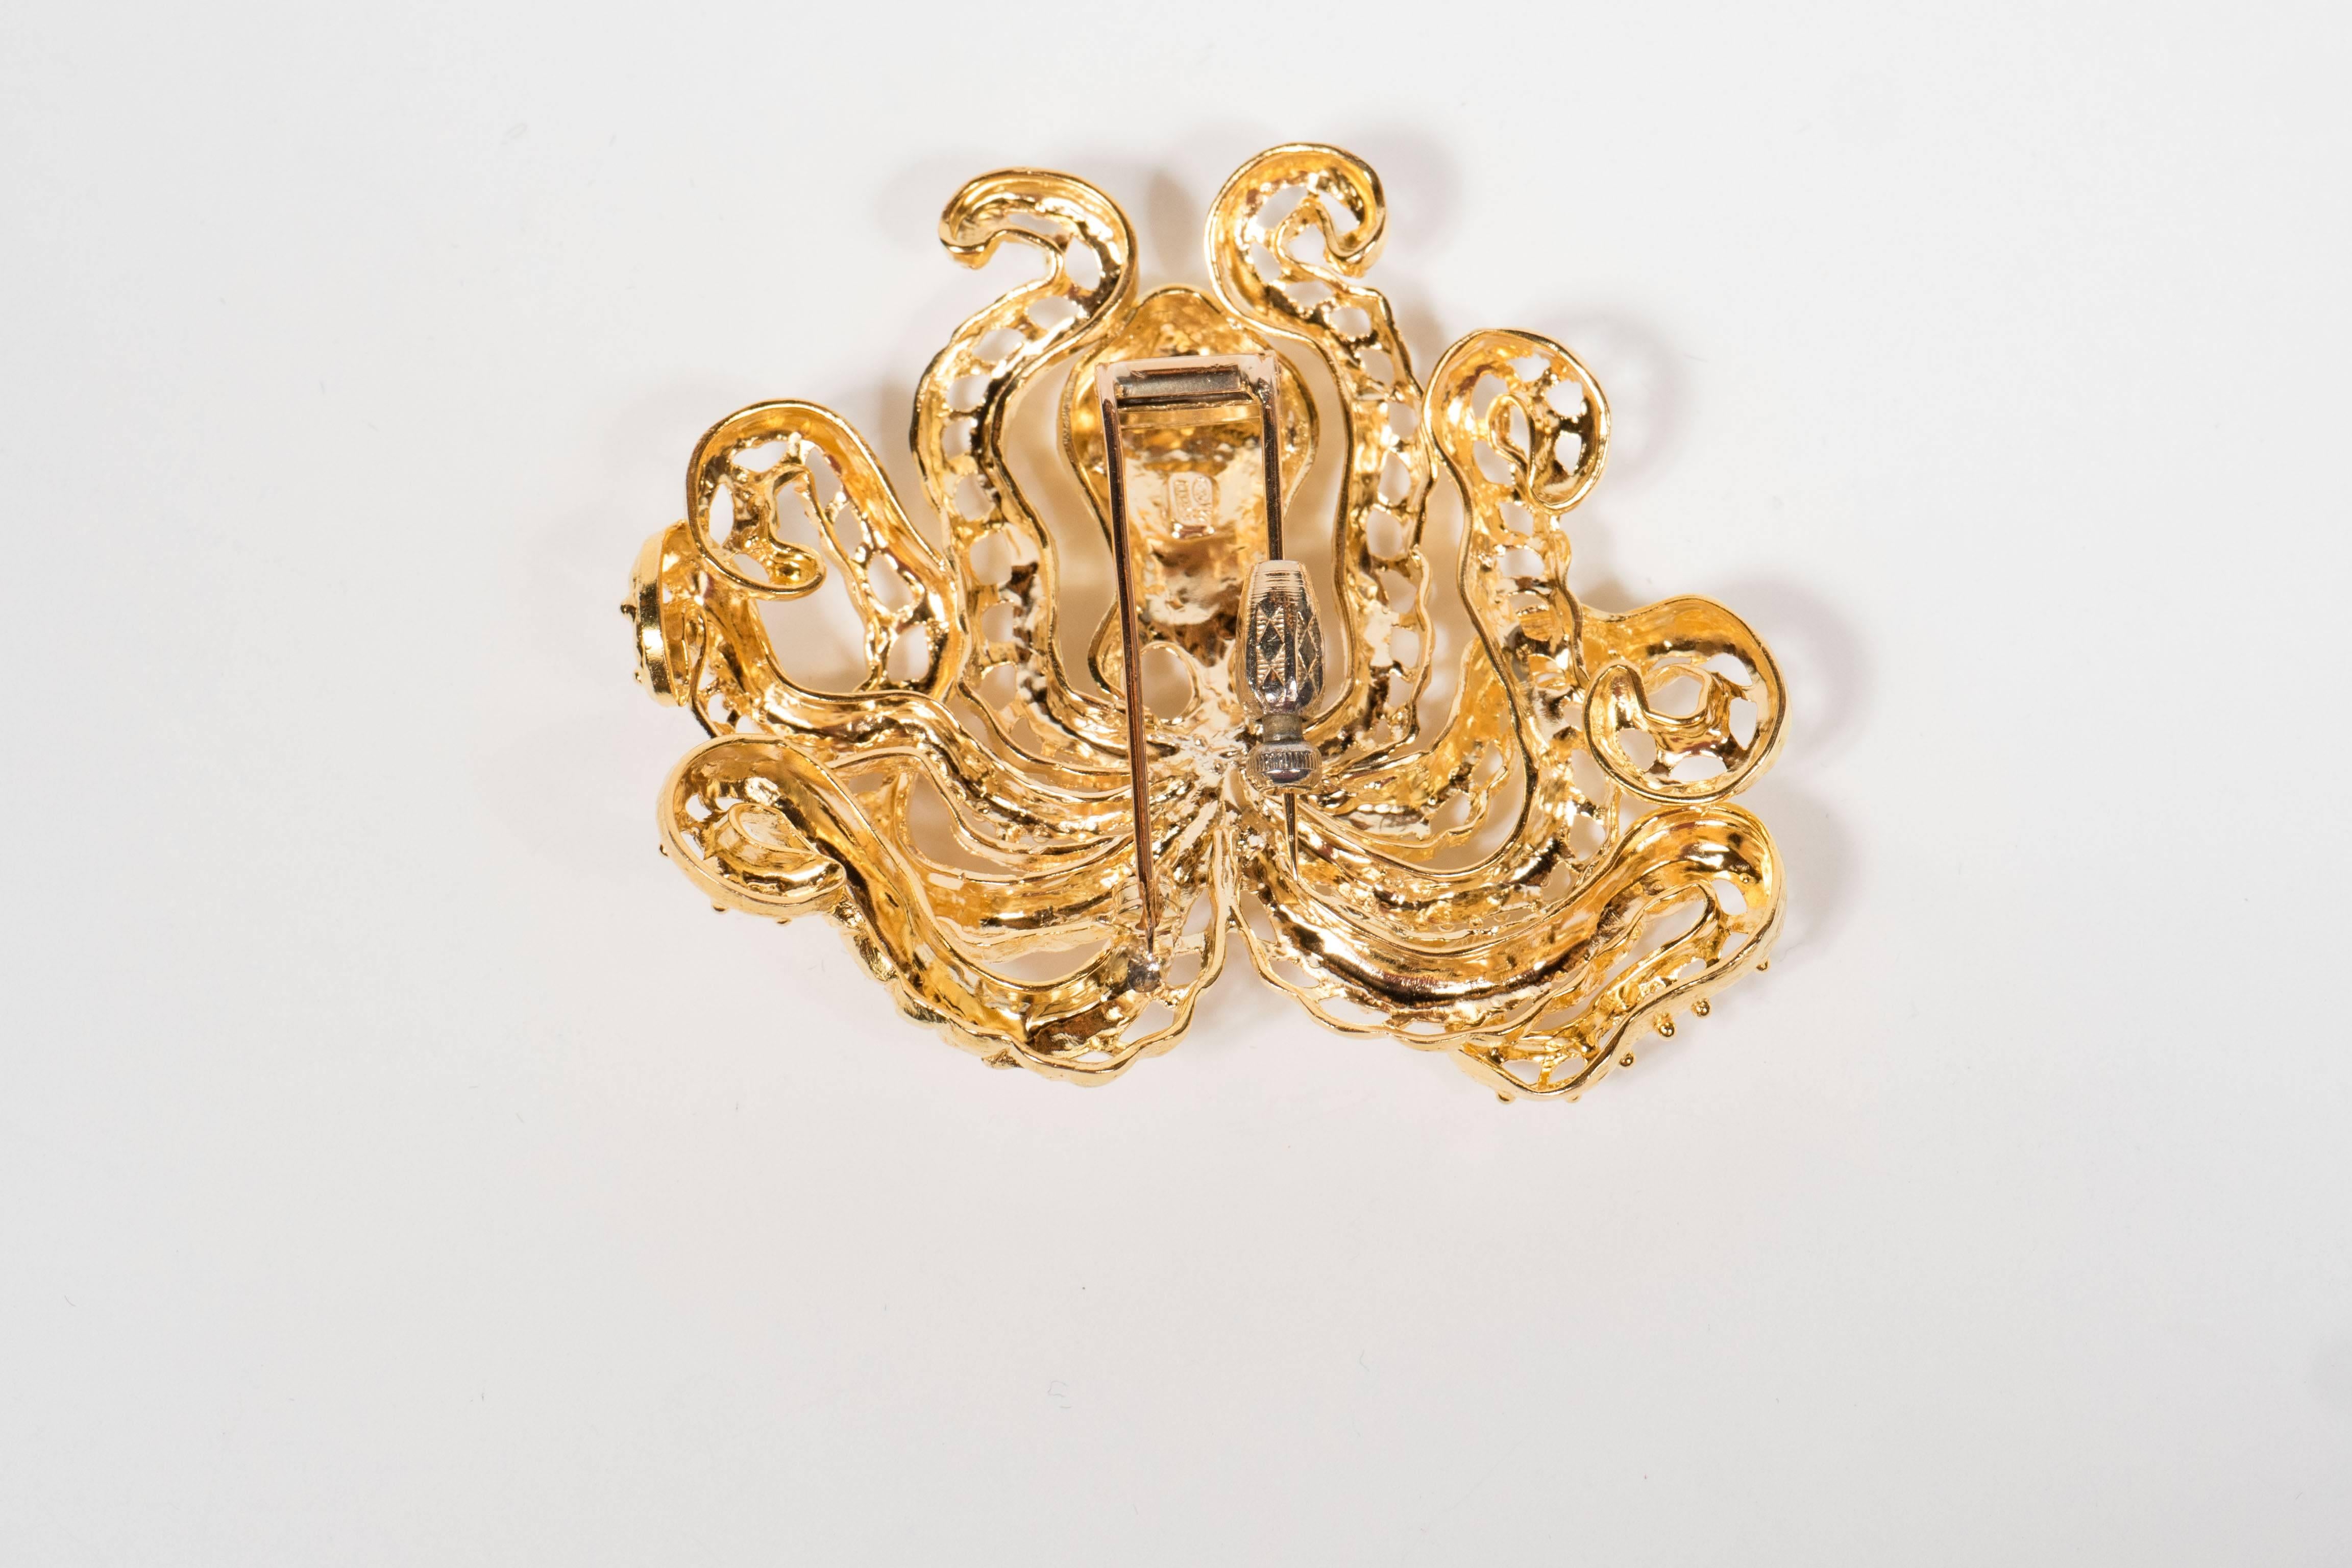 This incredible brooch features a modernist octopus design all executed in 18 k yellow gold. It can also be worn as a pendant as well .It is marked 18k Greece and weighs 52 grams.